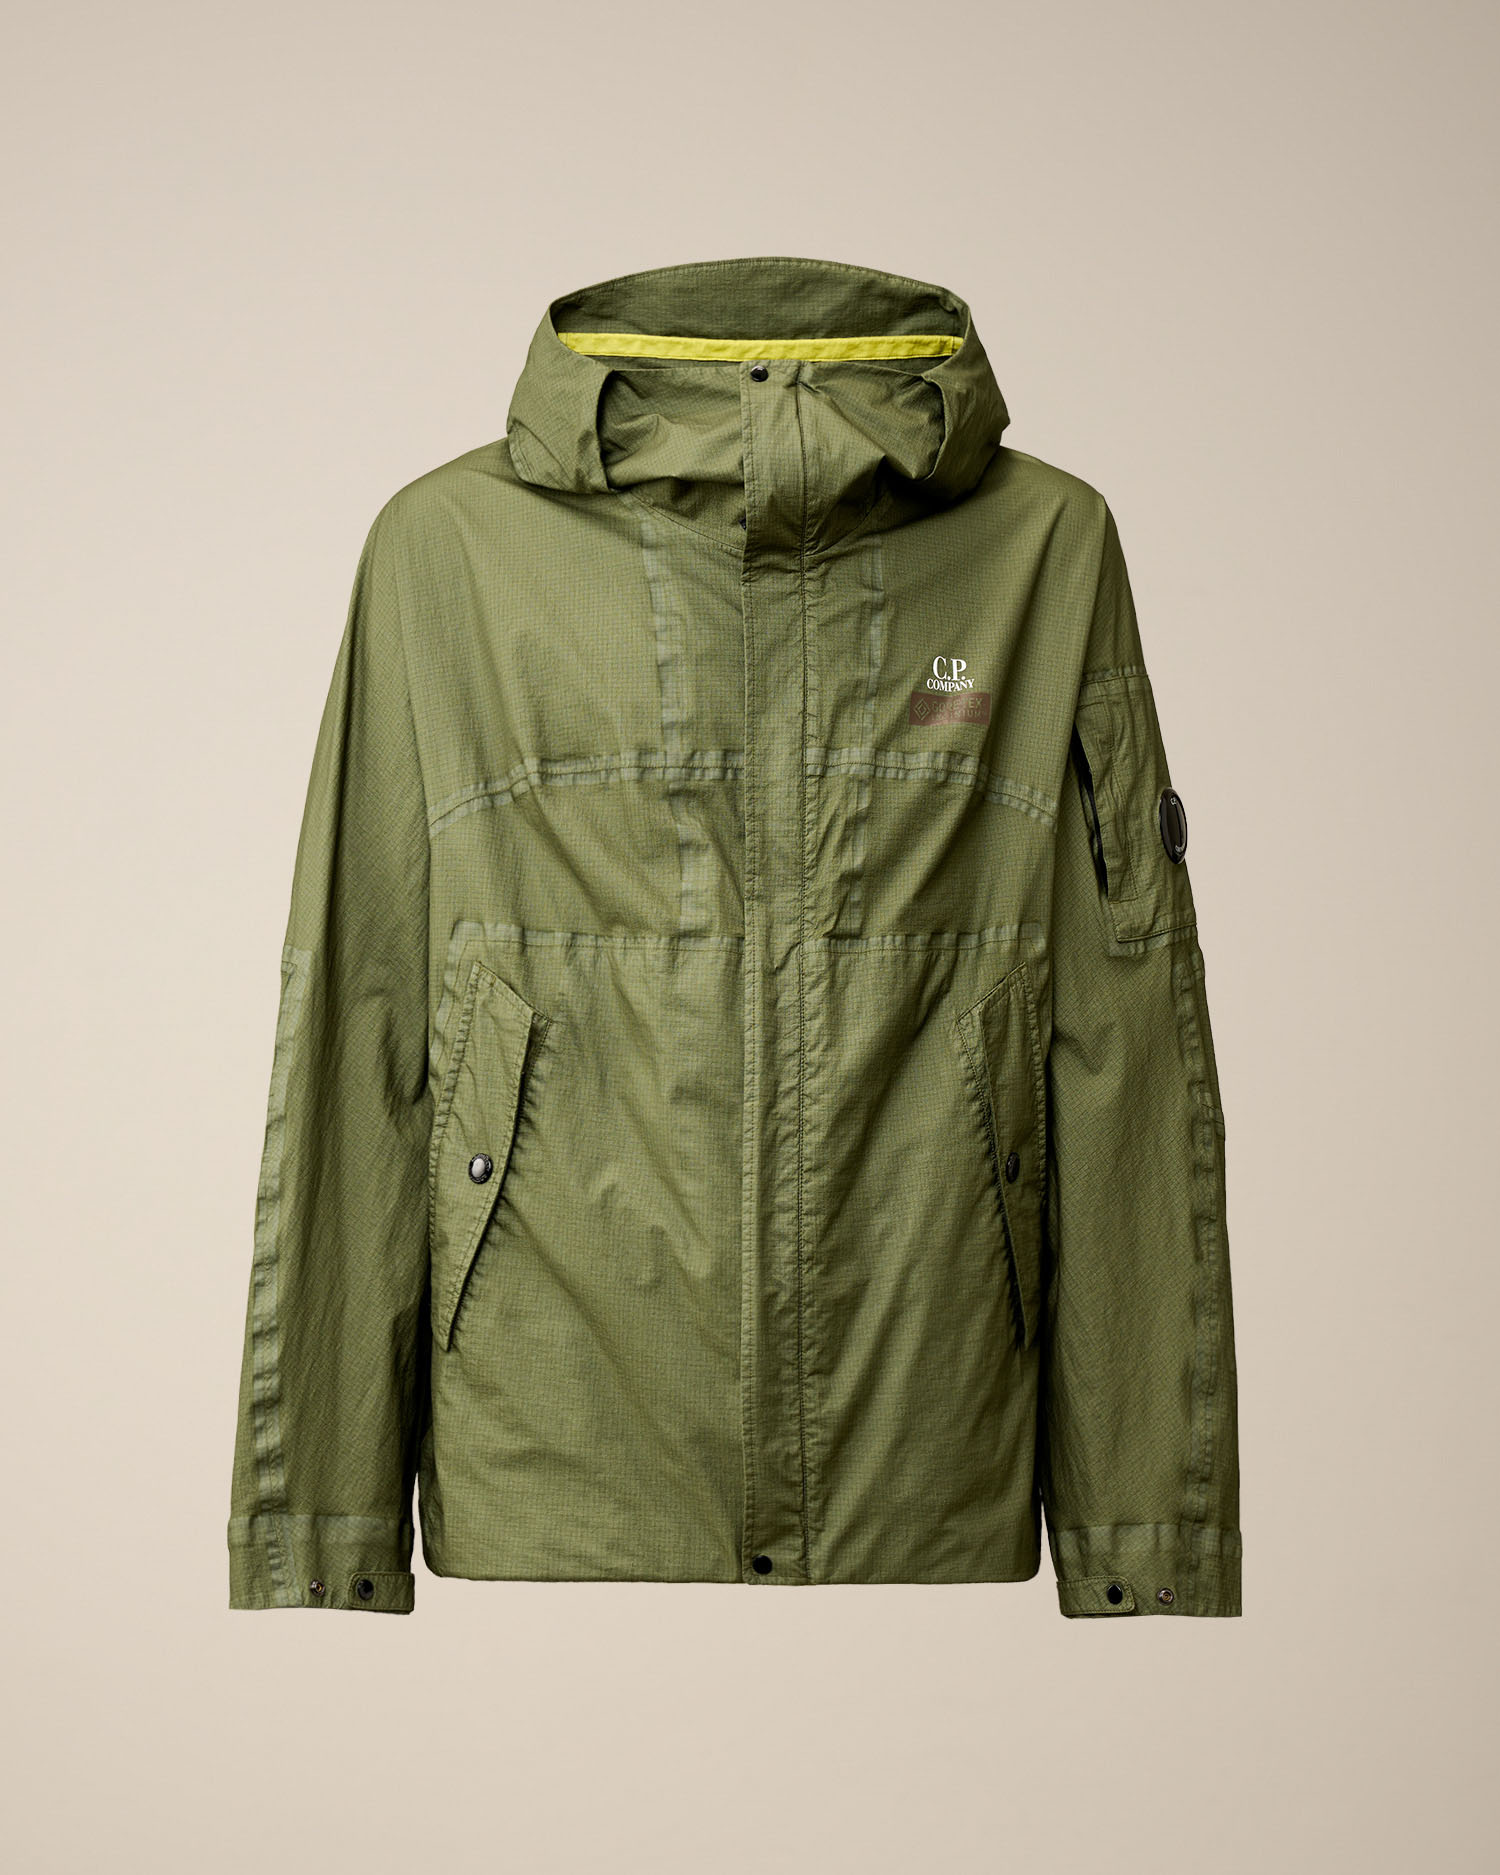 GORE G-Type Hooded Jacket